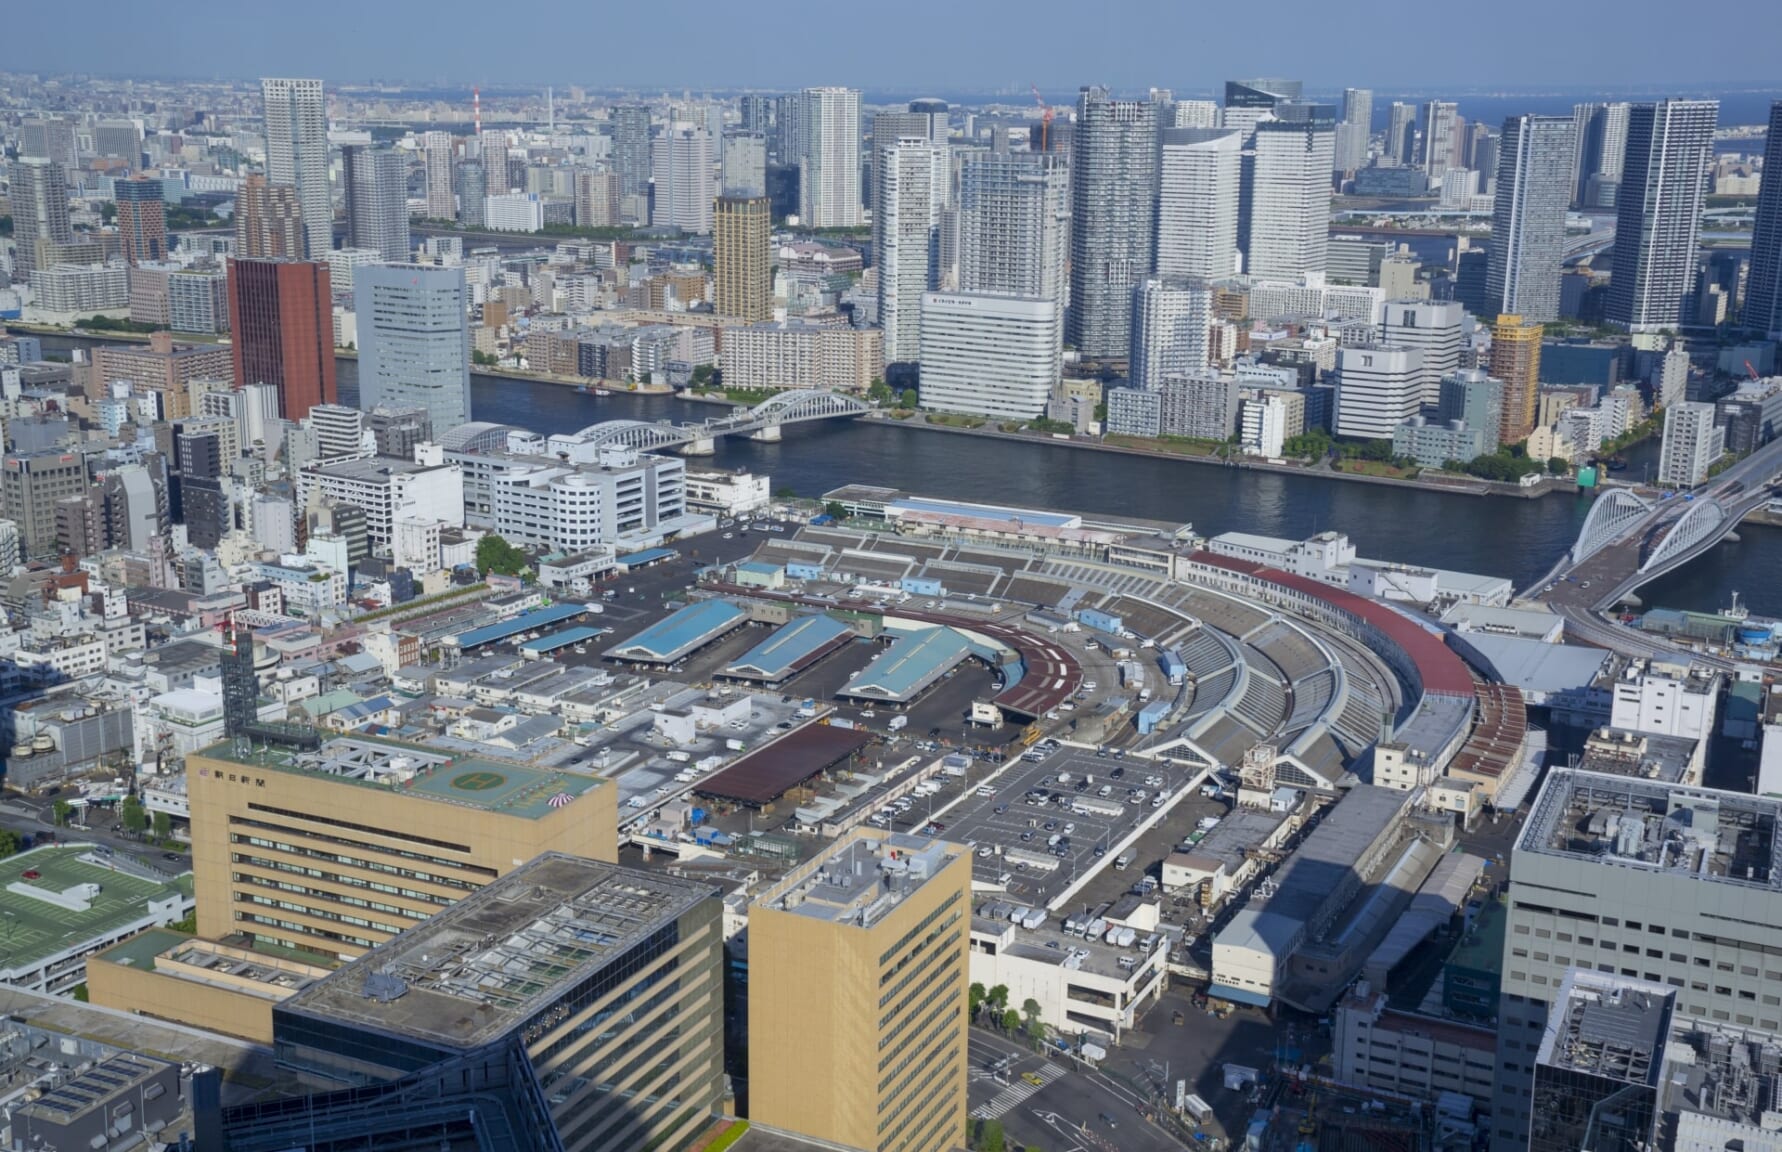 Aerial view of the old location of Tsukiji inner market